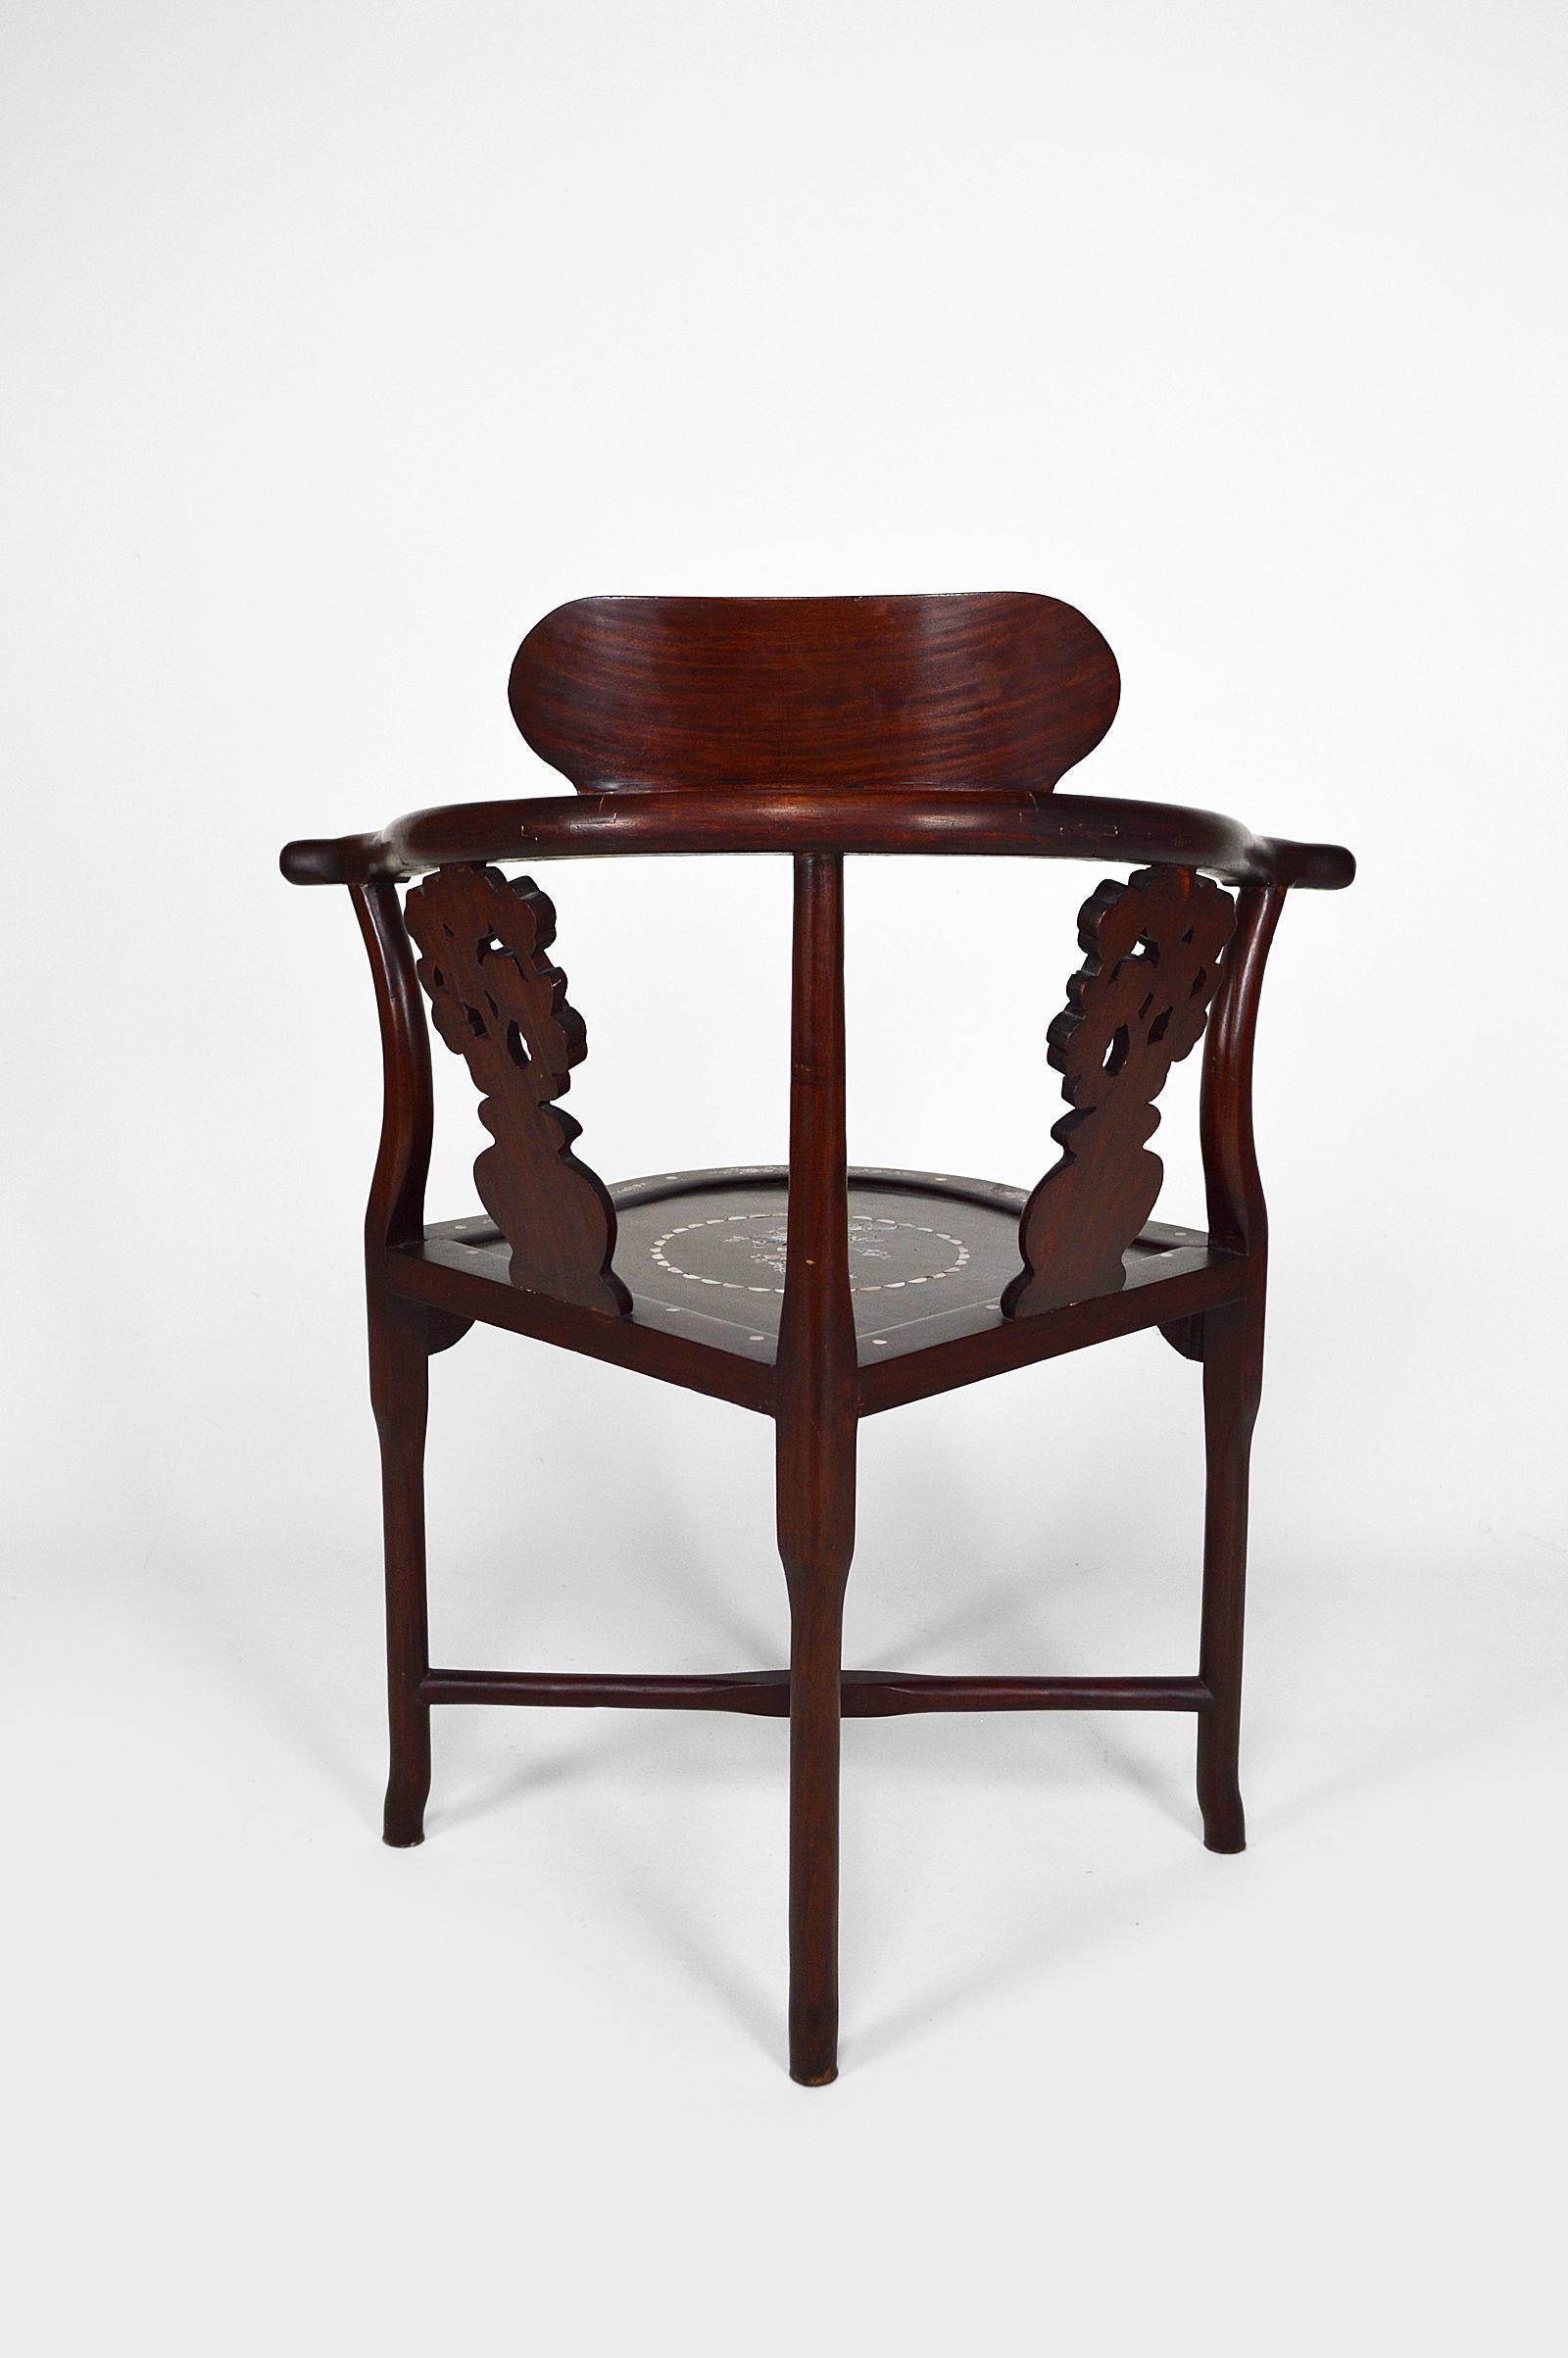 20th Century Set of 4 Asian Armchairs in Carved and Inlaid Wood, circa 1900-1920 For Sale